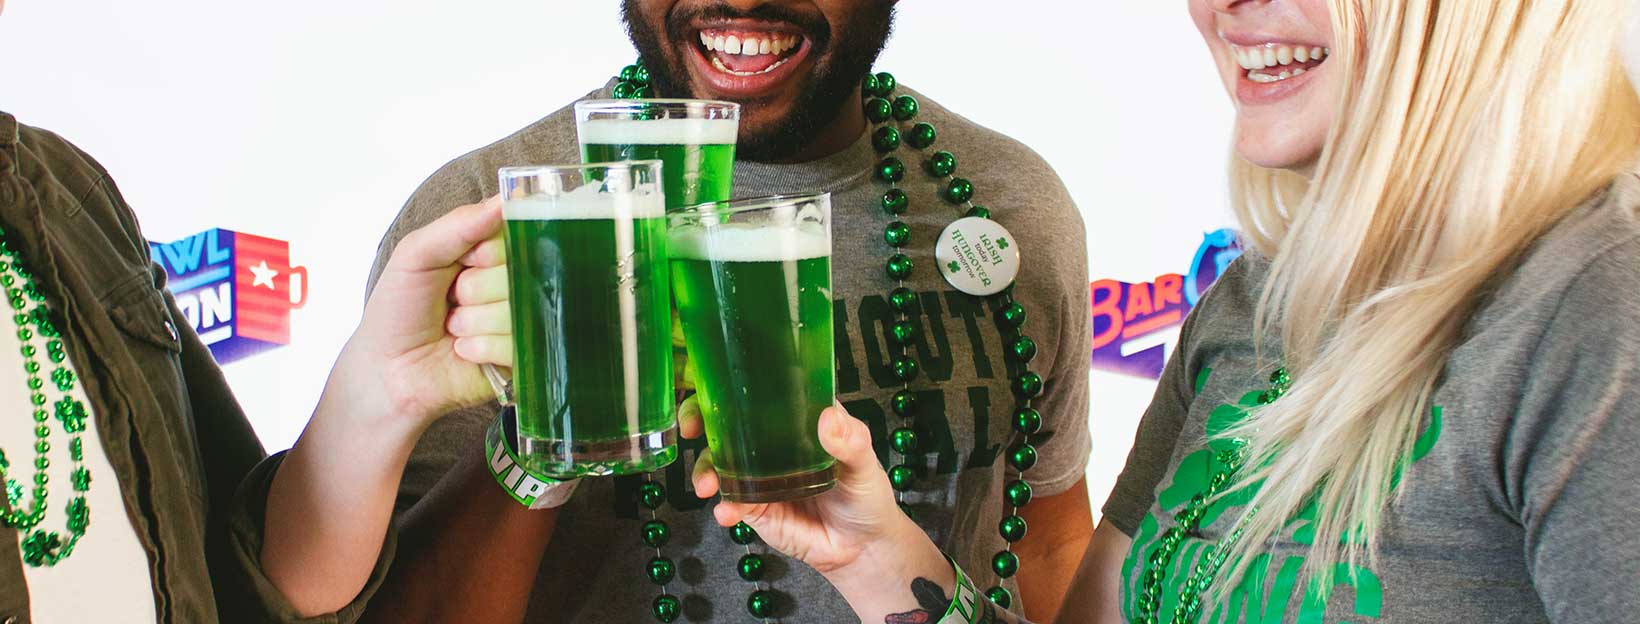 Bar Crawl Nation Best Themed Events Across the USA